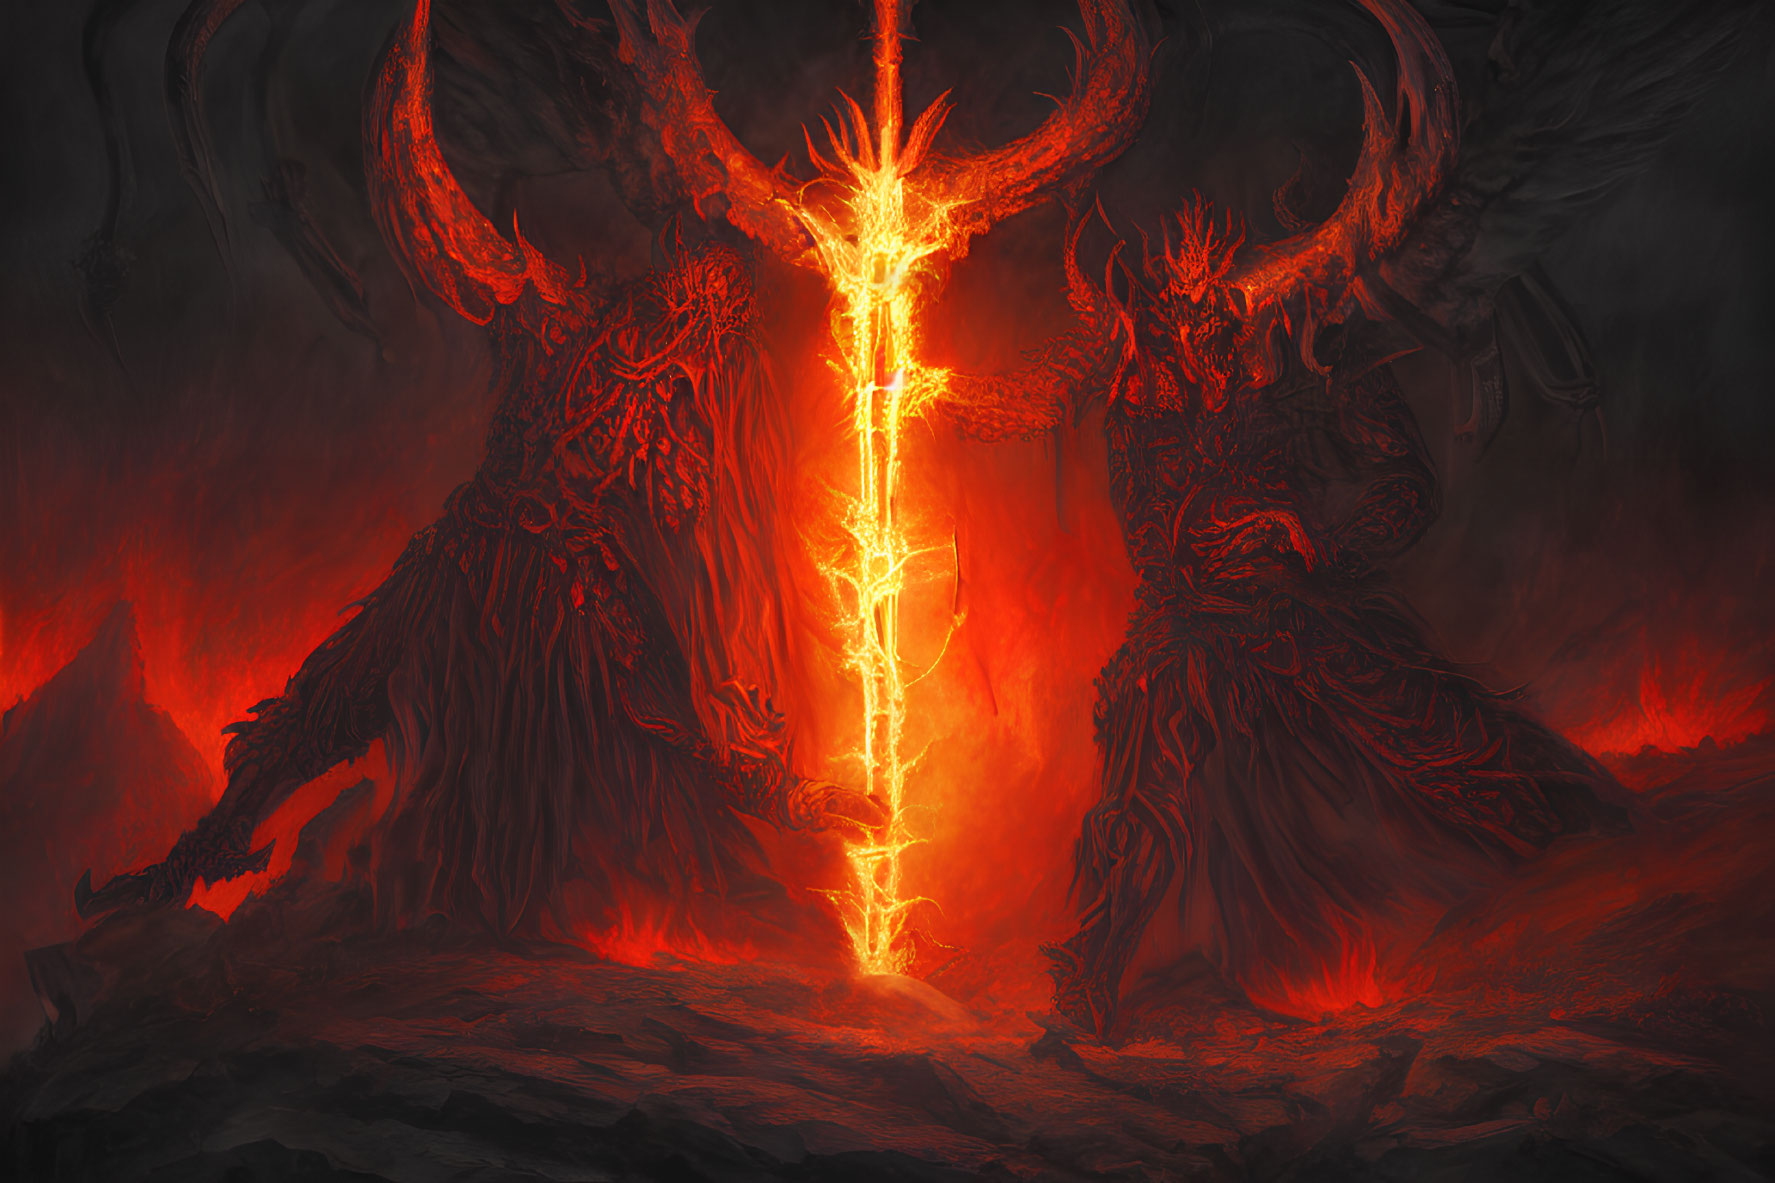 Two horned figures with fiery sword in volcanic landscape.